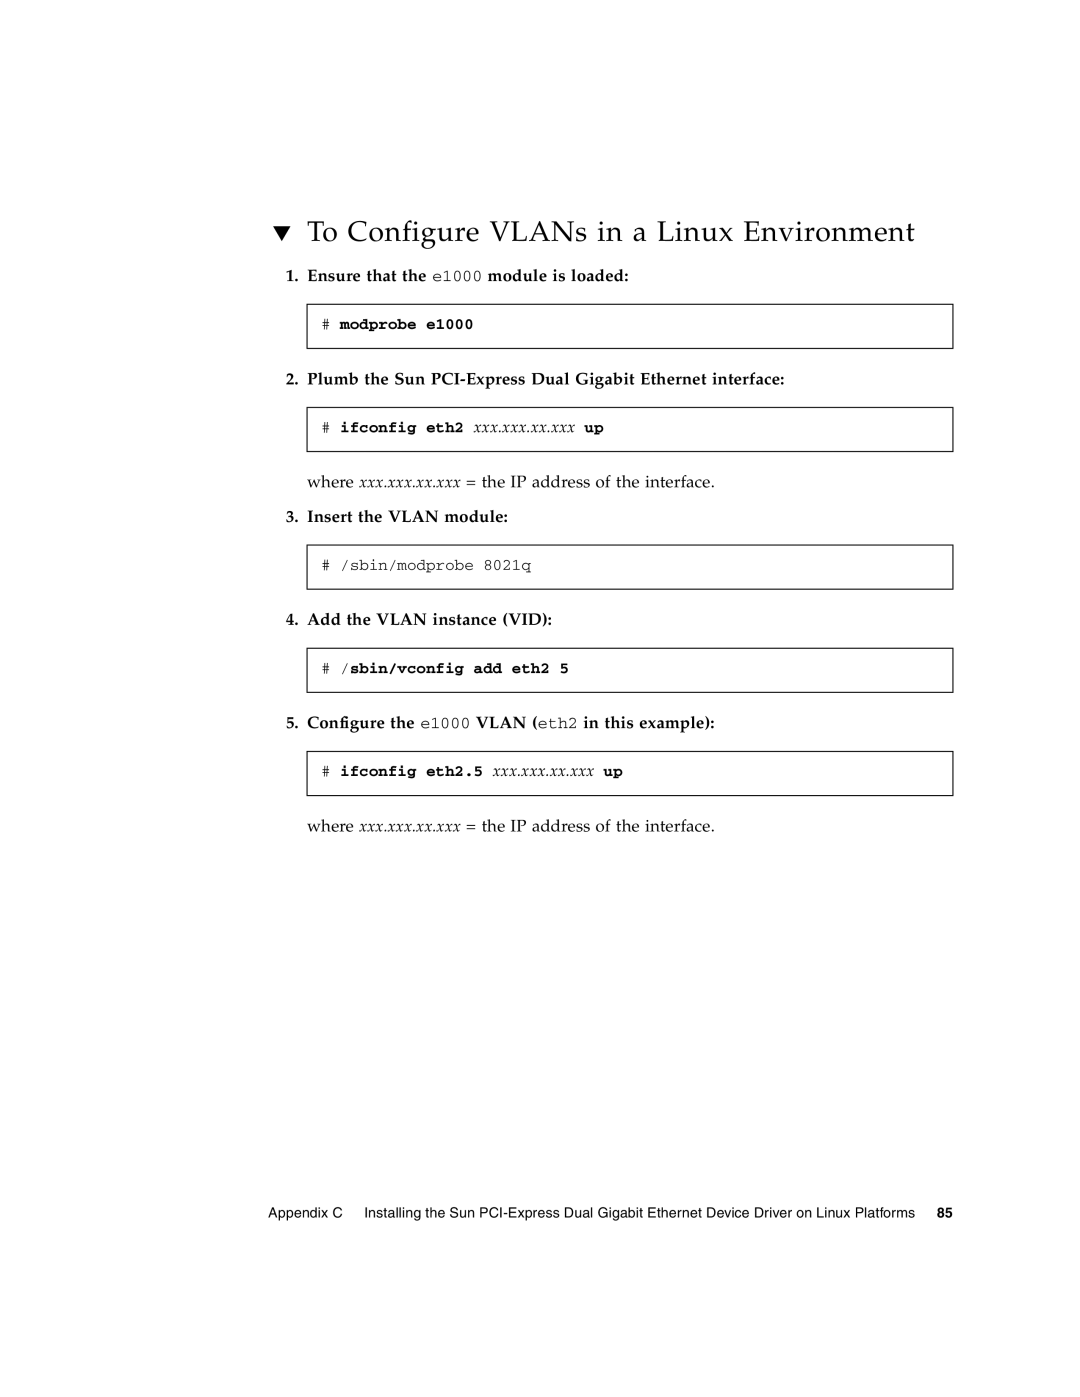 Sun Microsystems Gigabit Ethernet MMF/UTP Adapter manual To Configure VLANs in a Linux Environment, Insert the VLAN module 